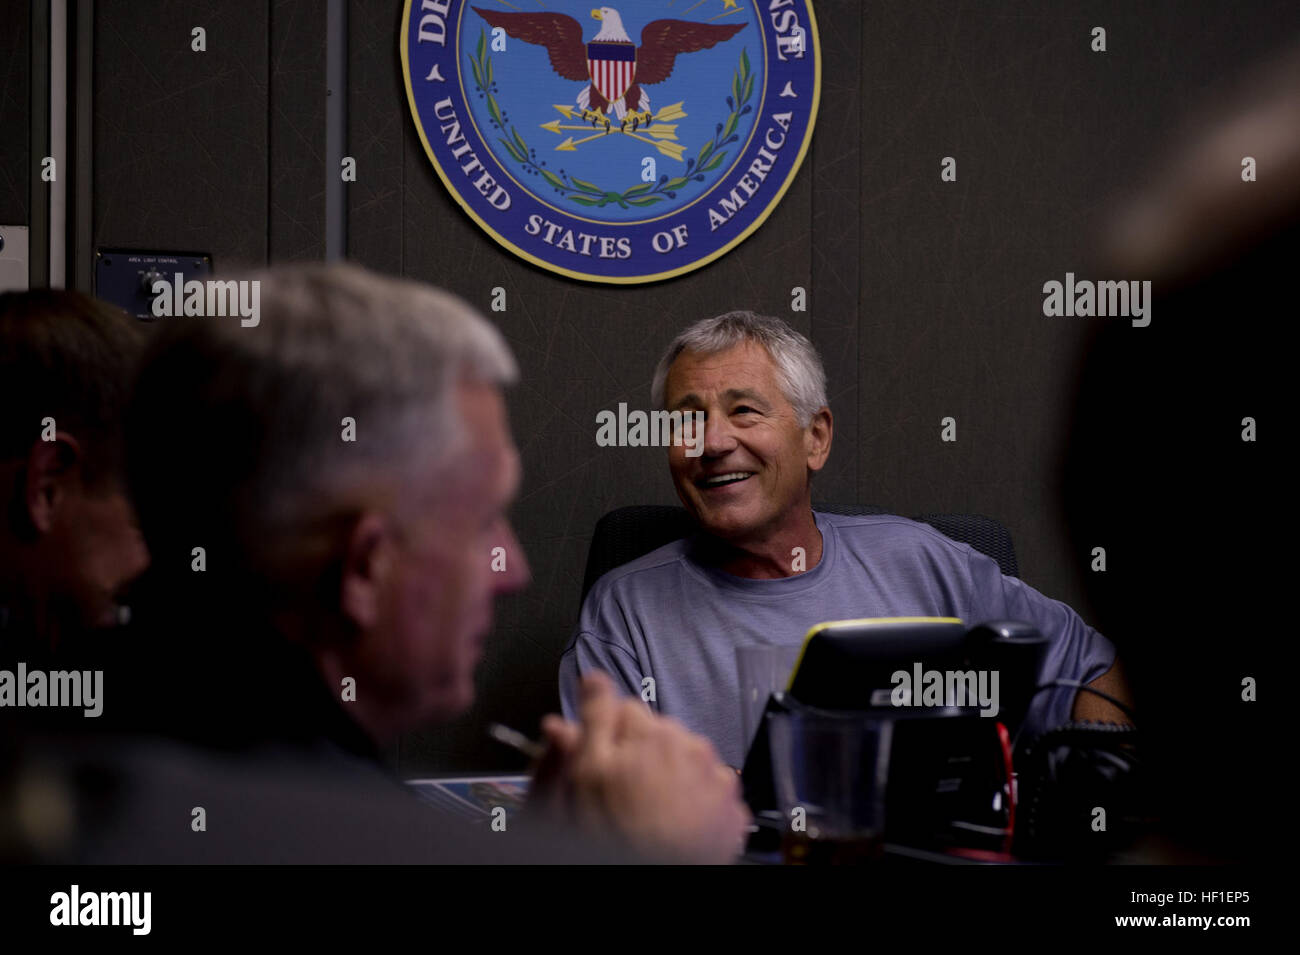 Secretary of Defense Chuck Hagel meets with his staff before a press briefing aboard a plane en route to Malaysia Aug. 23, 2013. Hagel was on a nine-day trip to meet with defense leaders in Malaysia, Indonesia, Brunei and the Philippines. (DoD photo by Sgt. Aaron Hostutler, U.S. Marine Corps/Released) Secretary of Defense 130823-M-EV637-059 Stock Photo